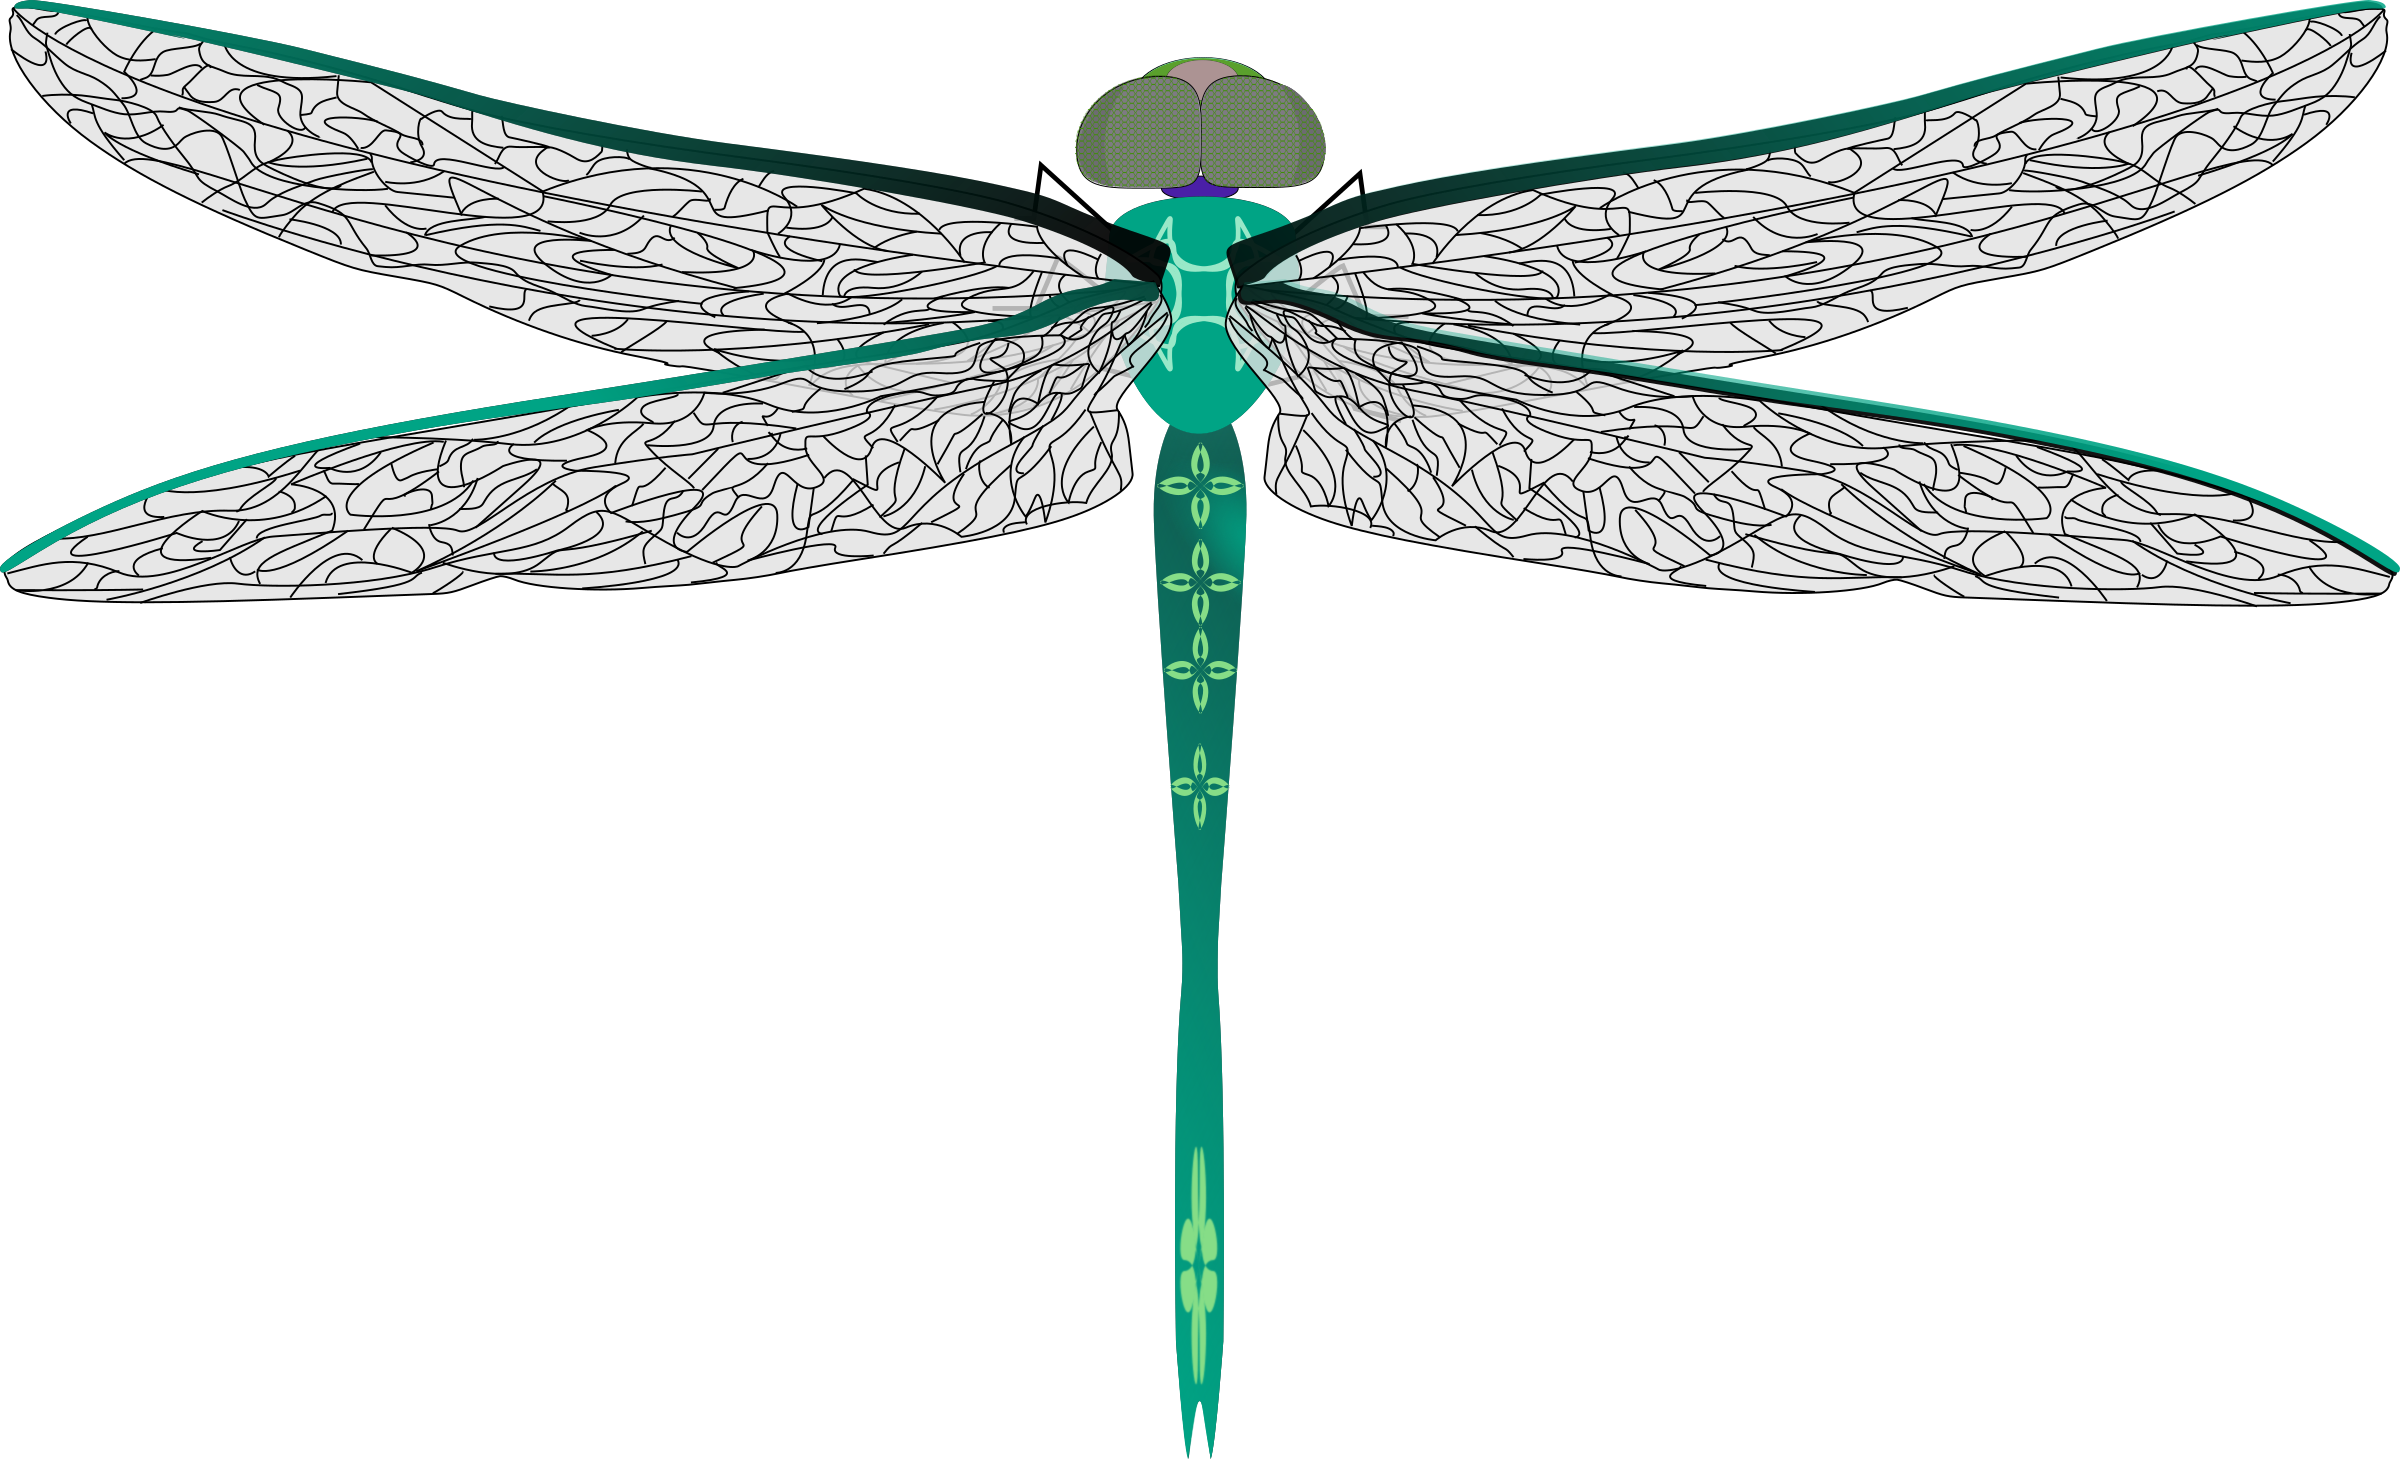 dragonfly clipart free download - photo #5